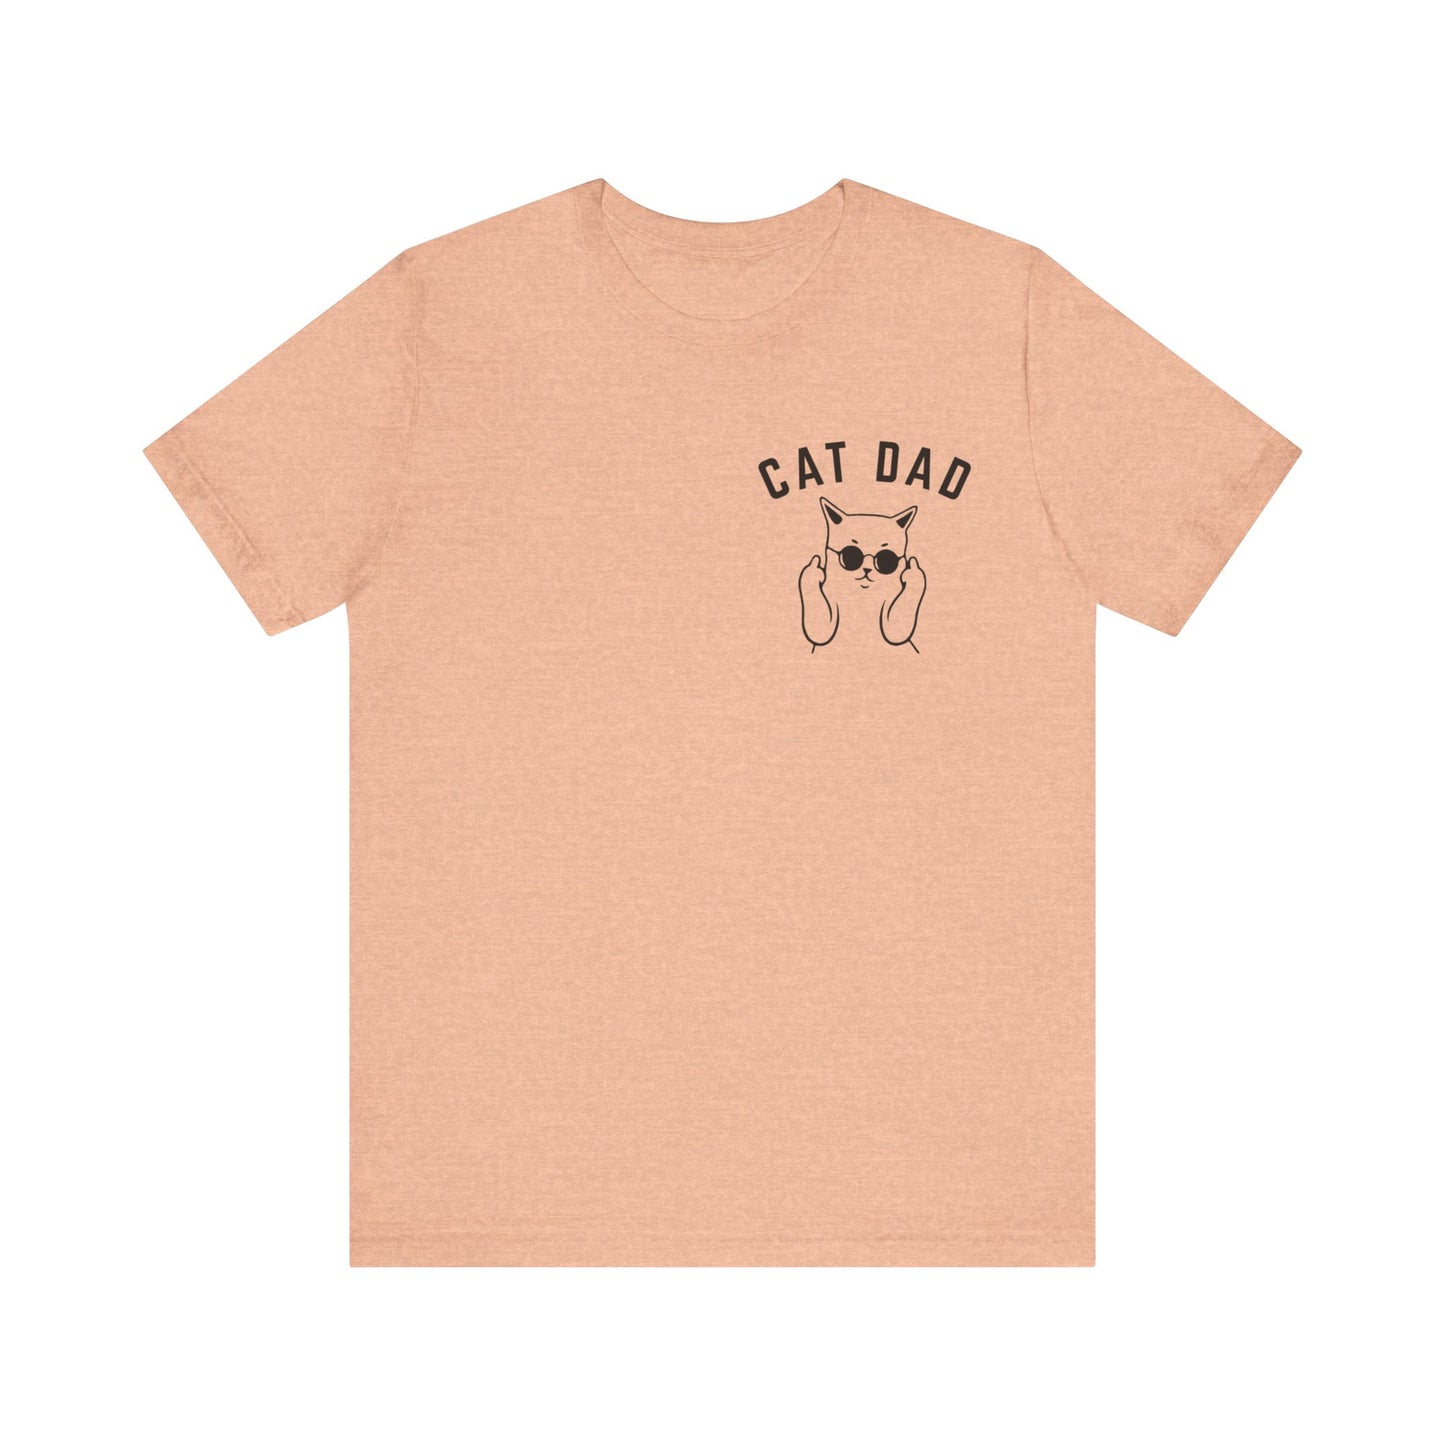 Cat Dad Shirt, Cat Lover Shirt, Funny Cat Tee, Cat Father, Cat Daddy Shirt, Animal Lover Gift, Gift from the Cat, Cat Dad Gift, T1110